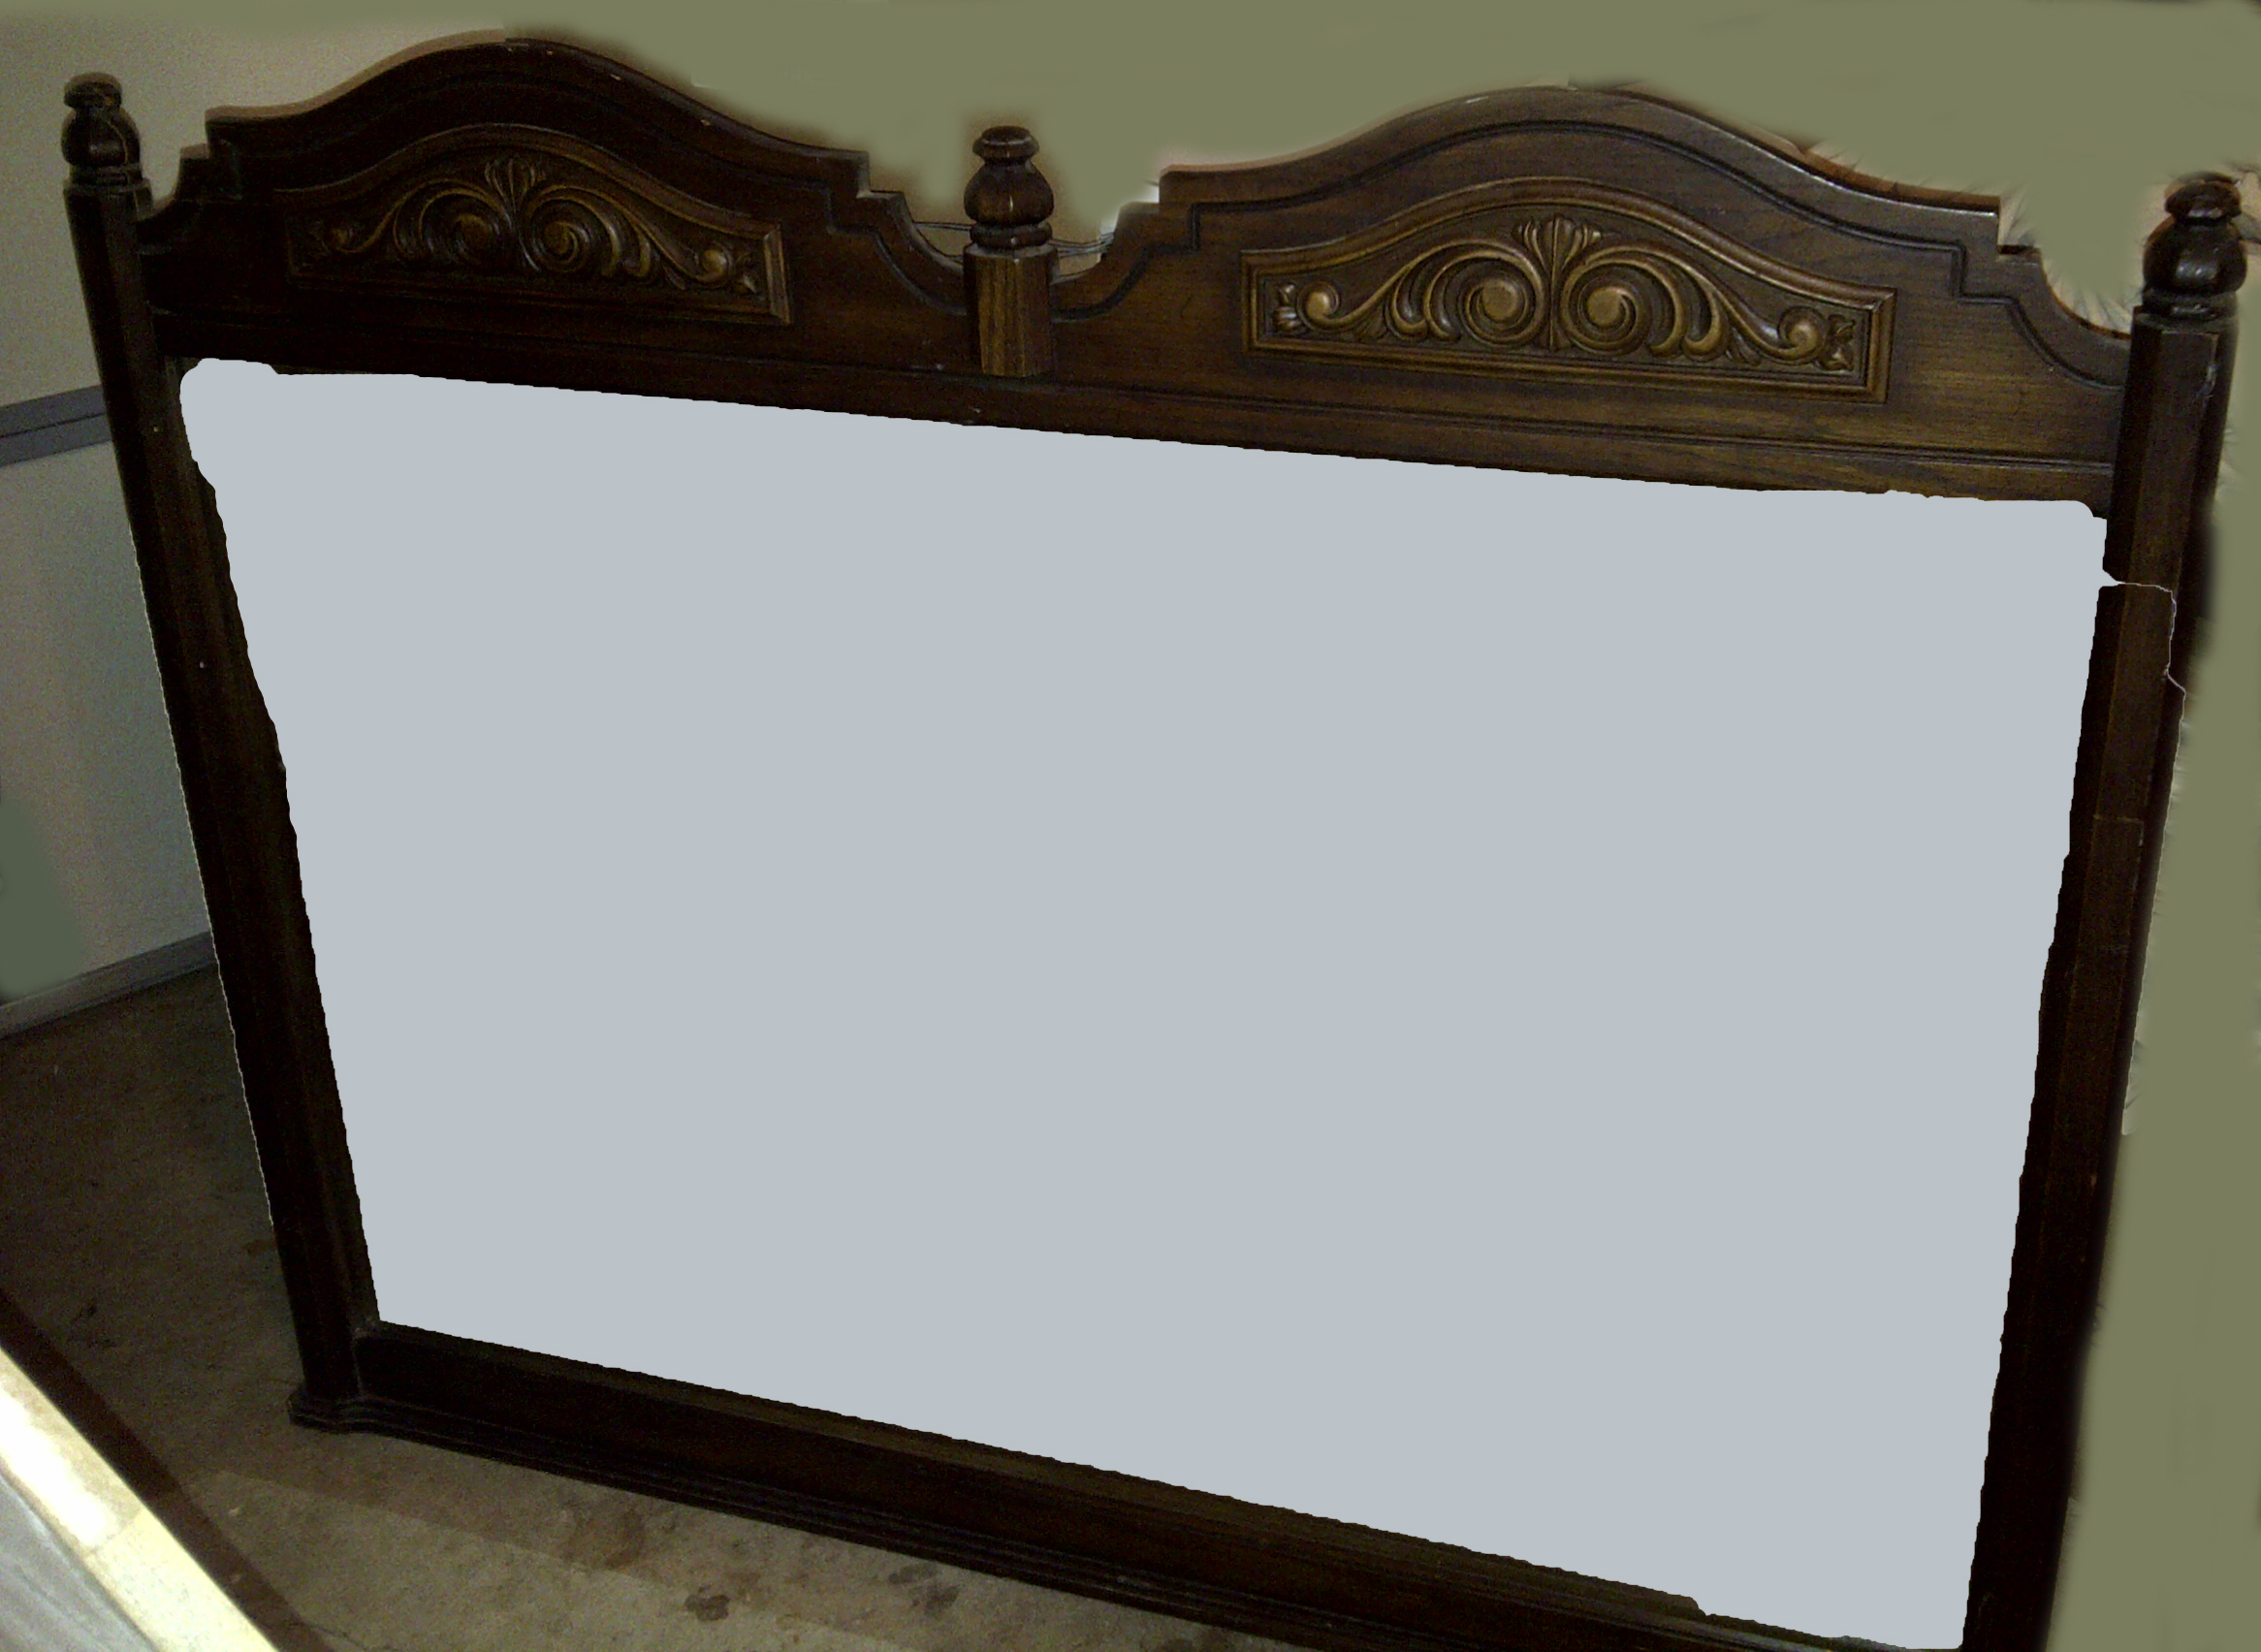 "Before" photo of mirror